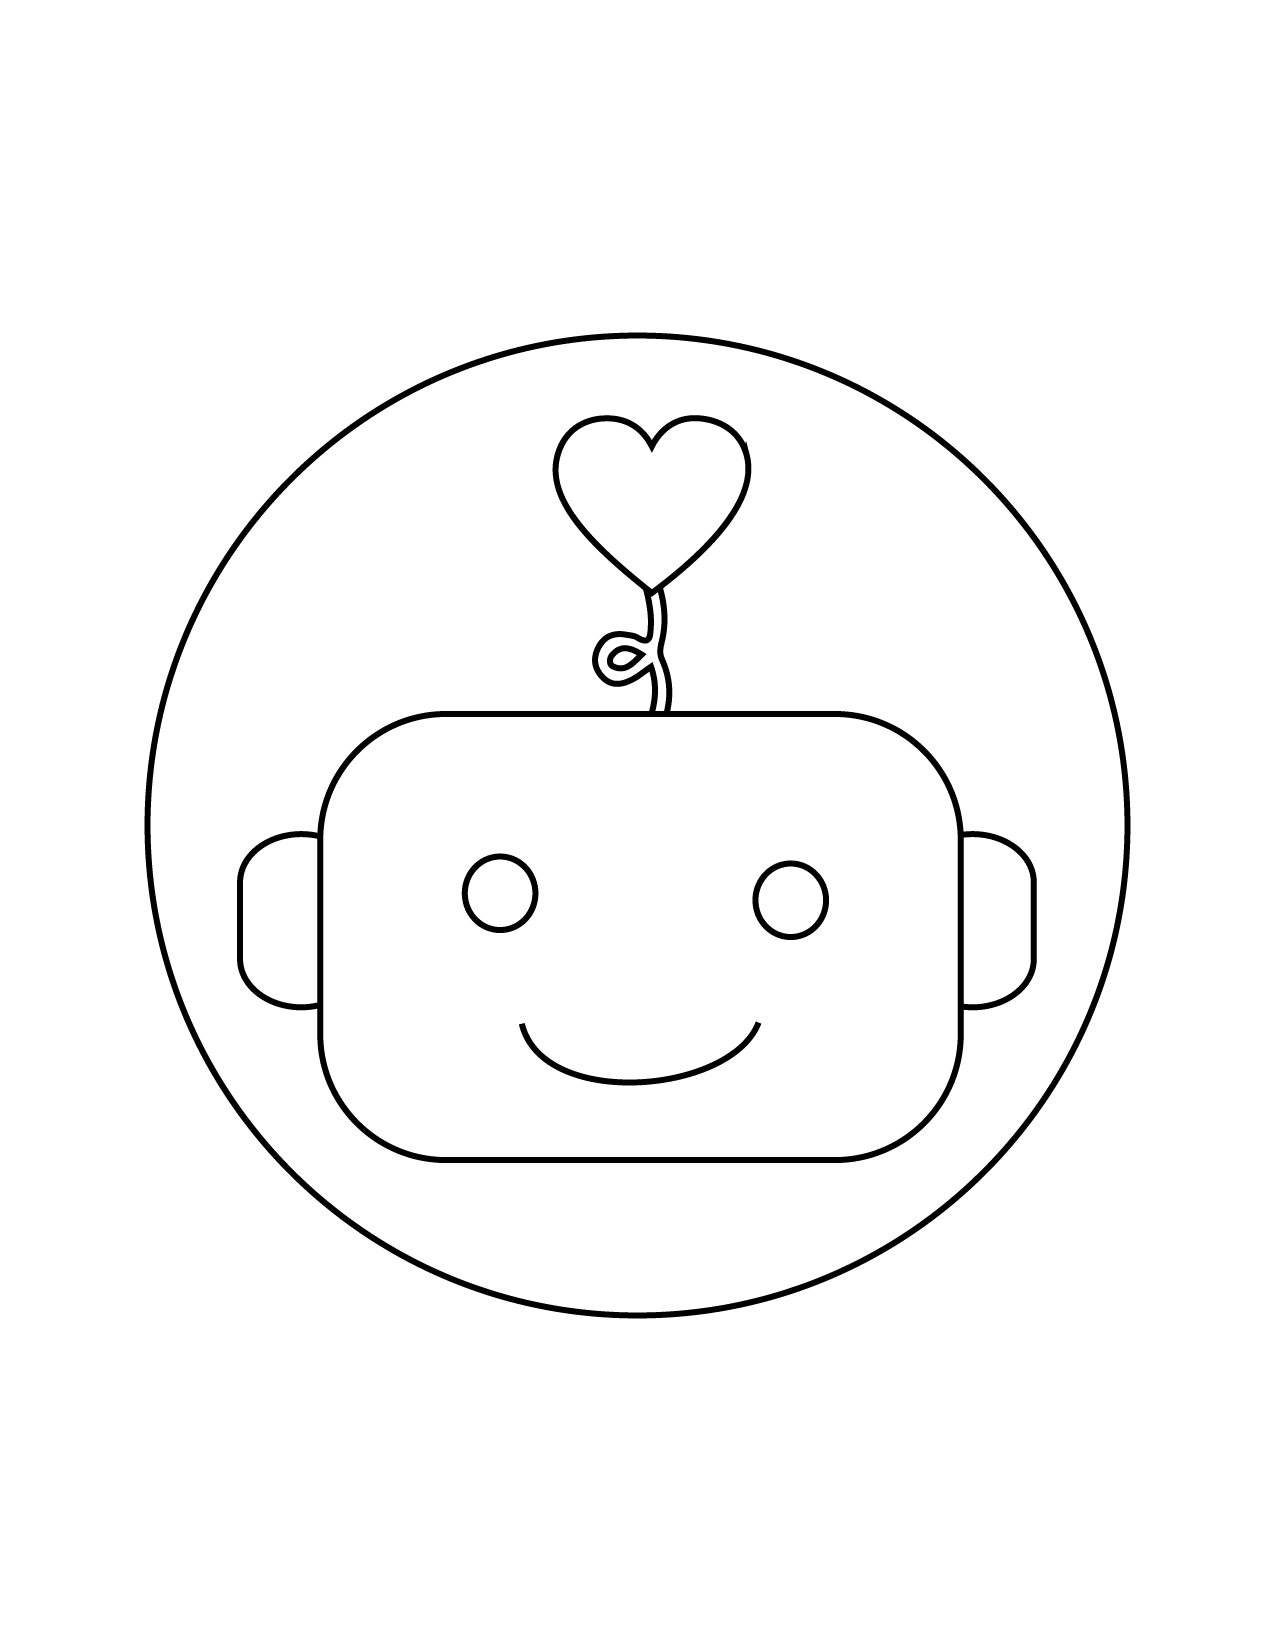 Robot With Heart Tentacle Coloring Page